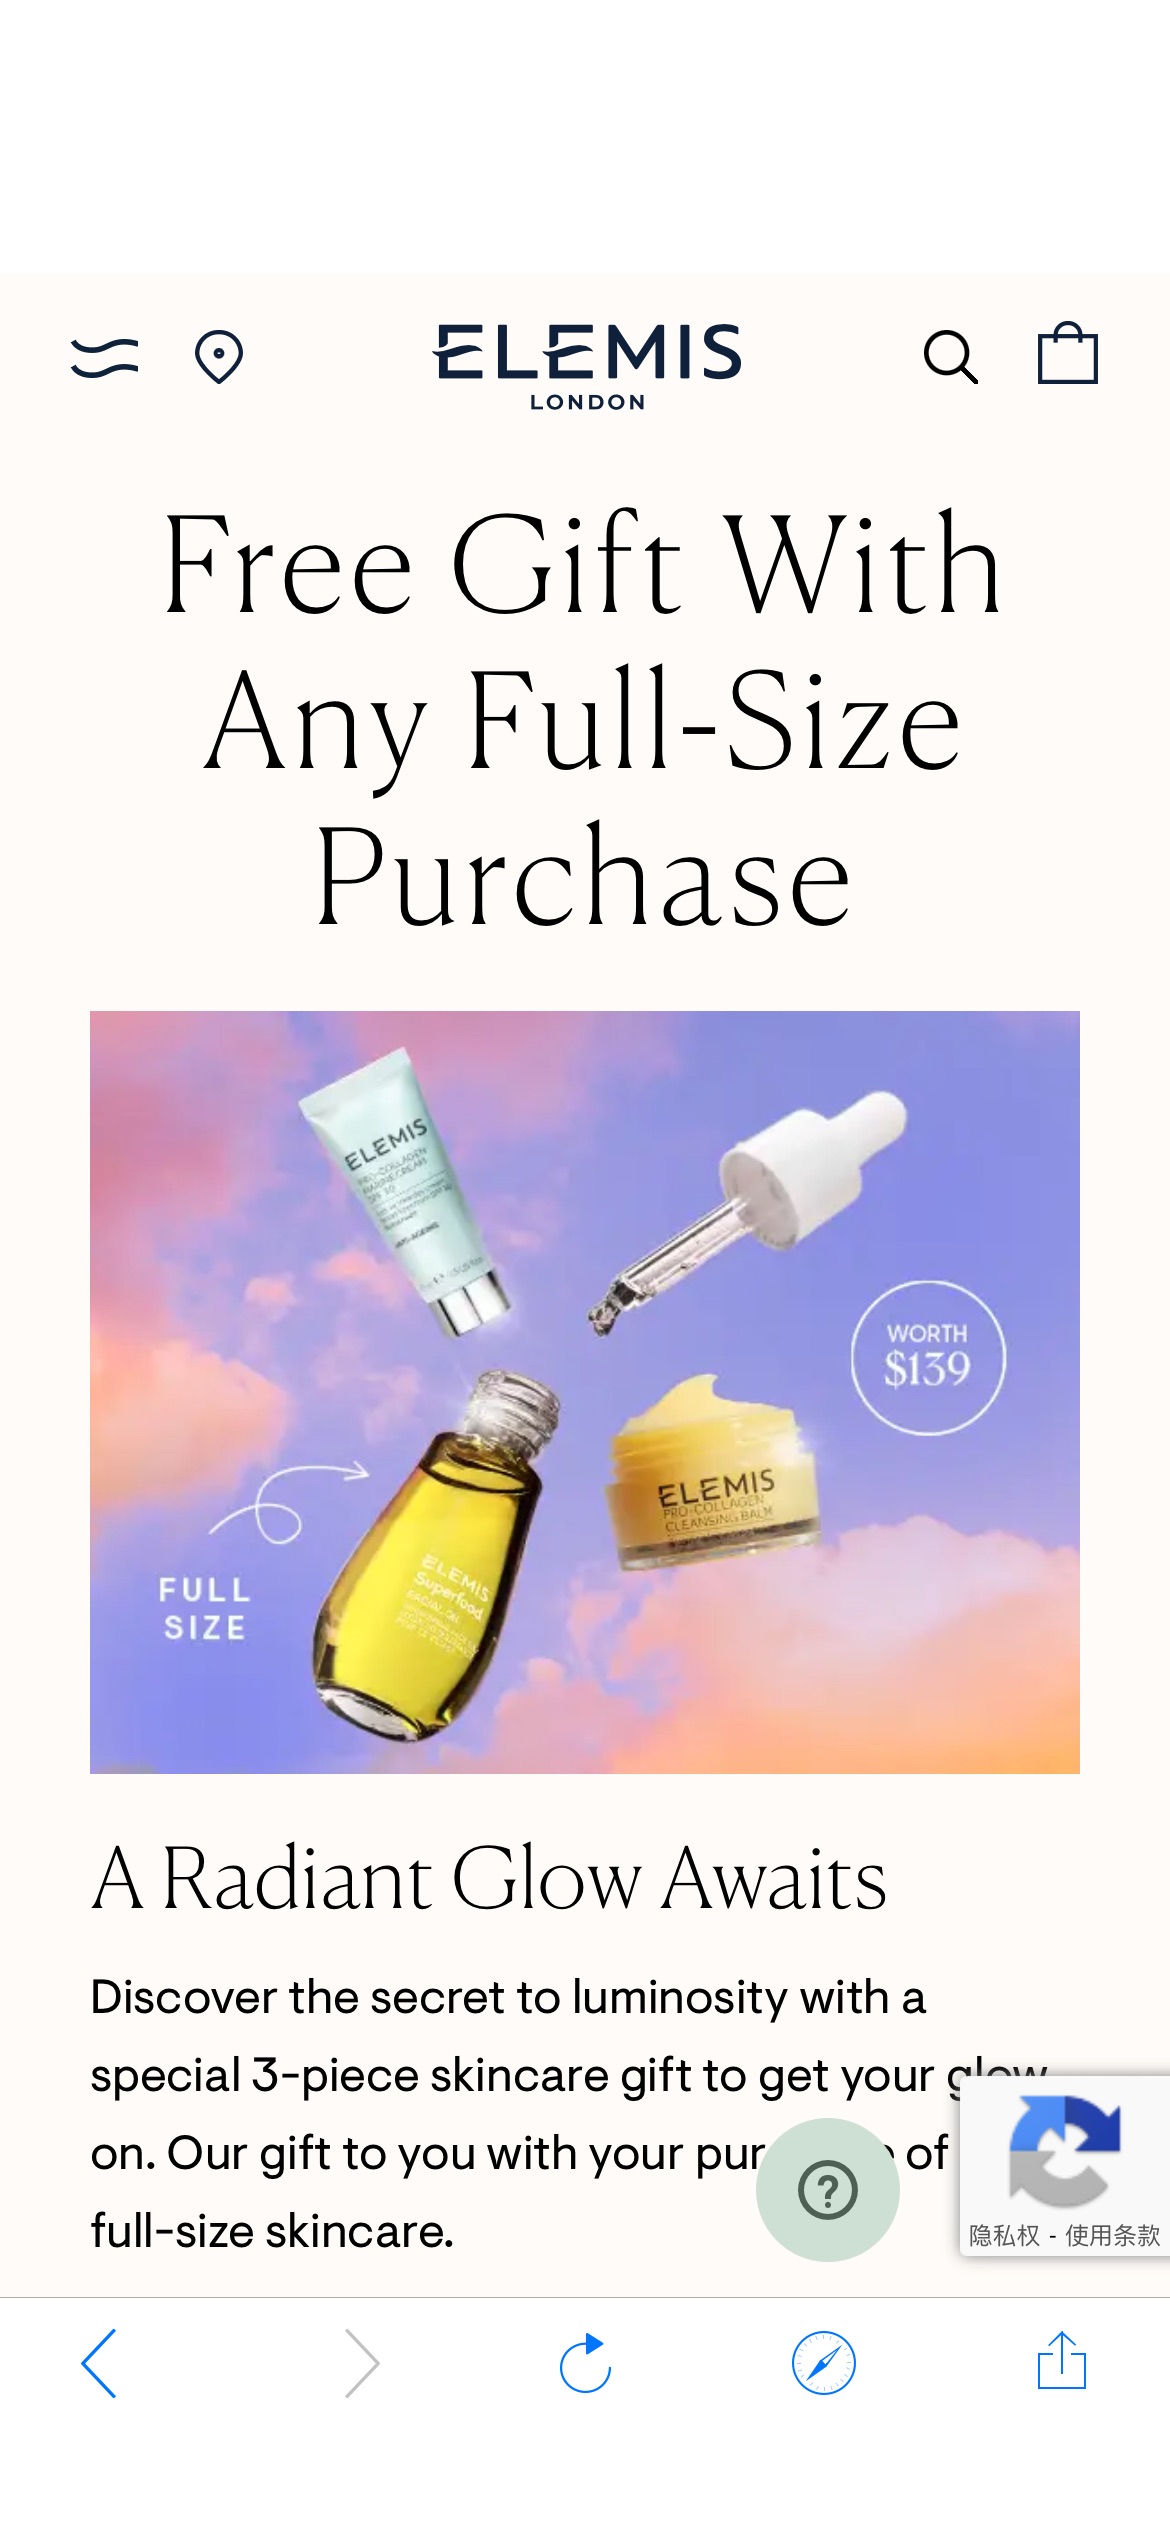 Free Gift With Any Full-Size Purchase